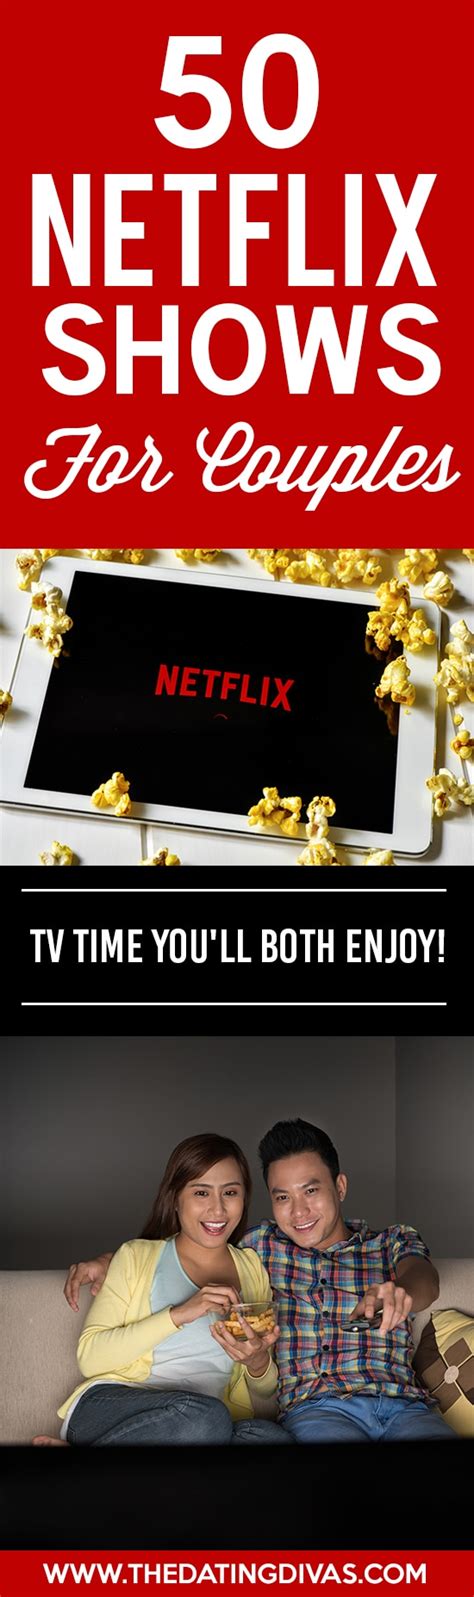 Make the switch from cable. Best Netflix Shows for Couples - from The Dating Divas